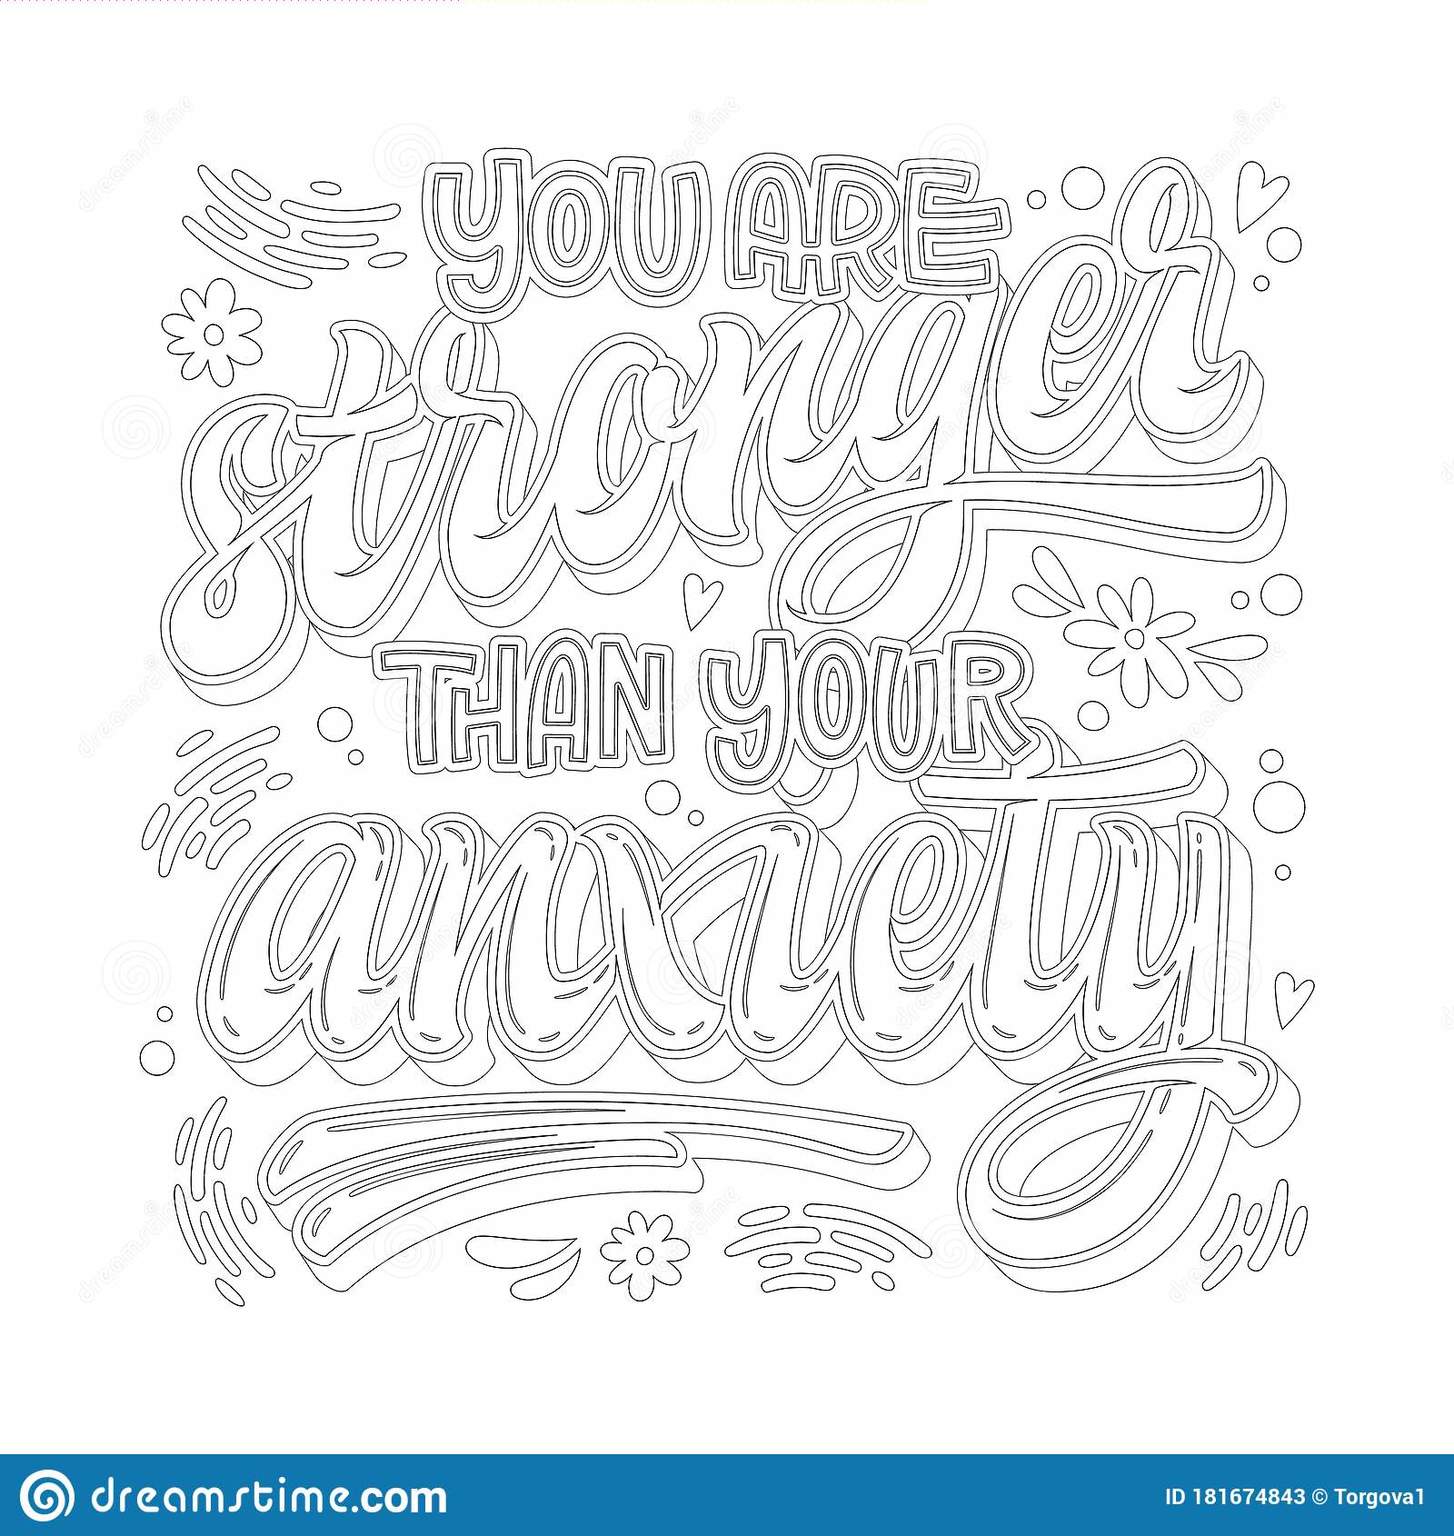 Anxiety Coloring Pages Printable